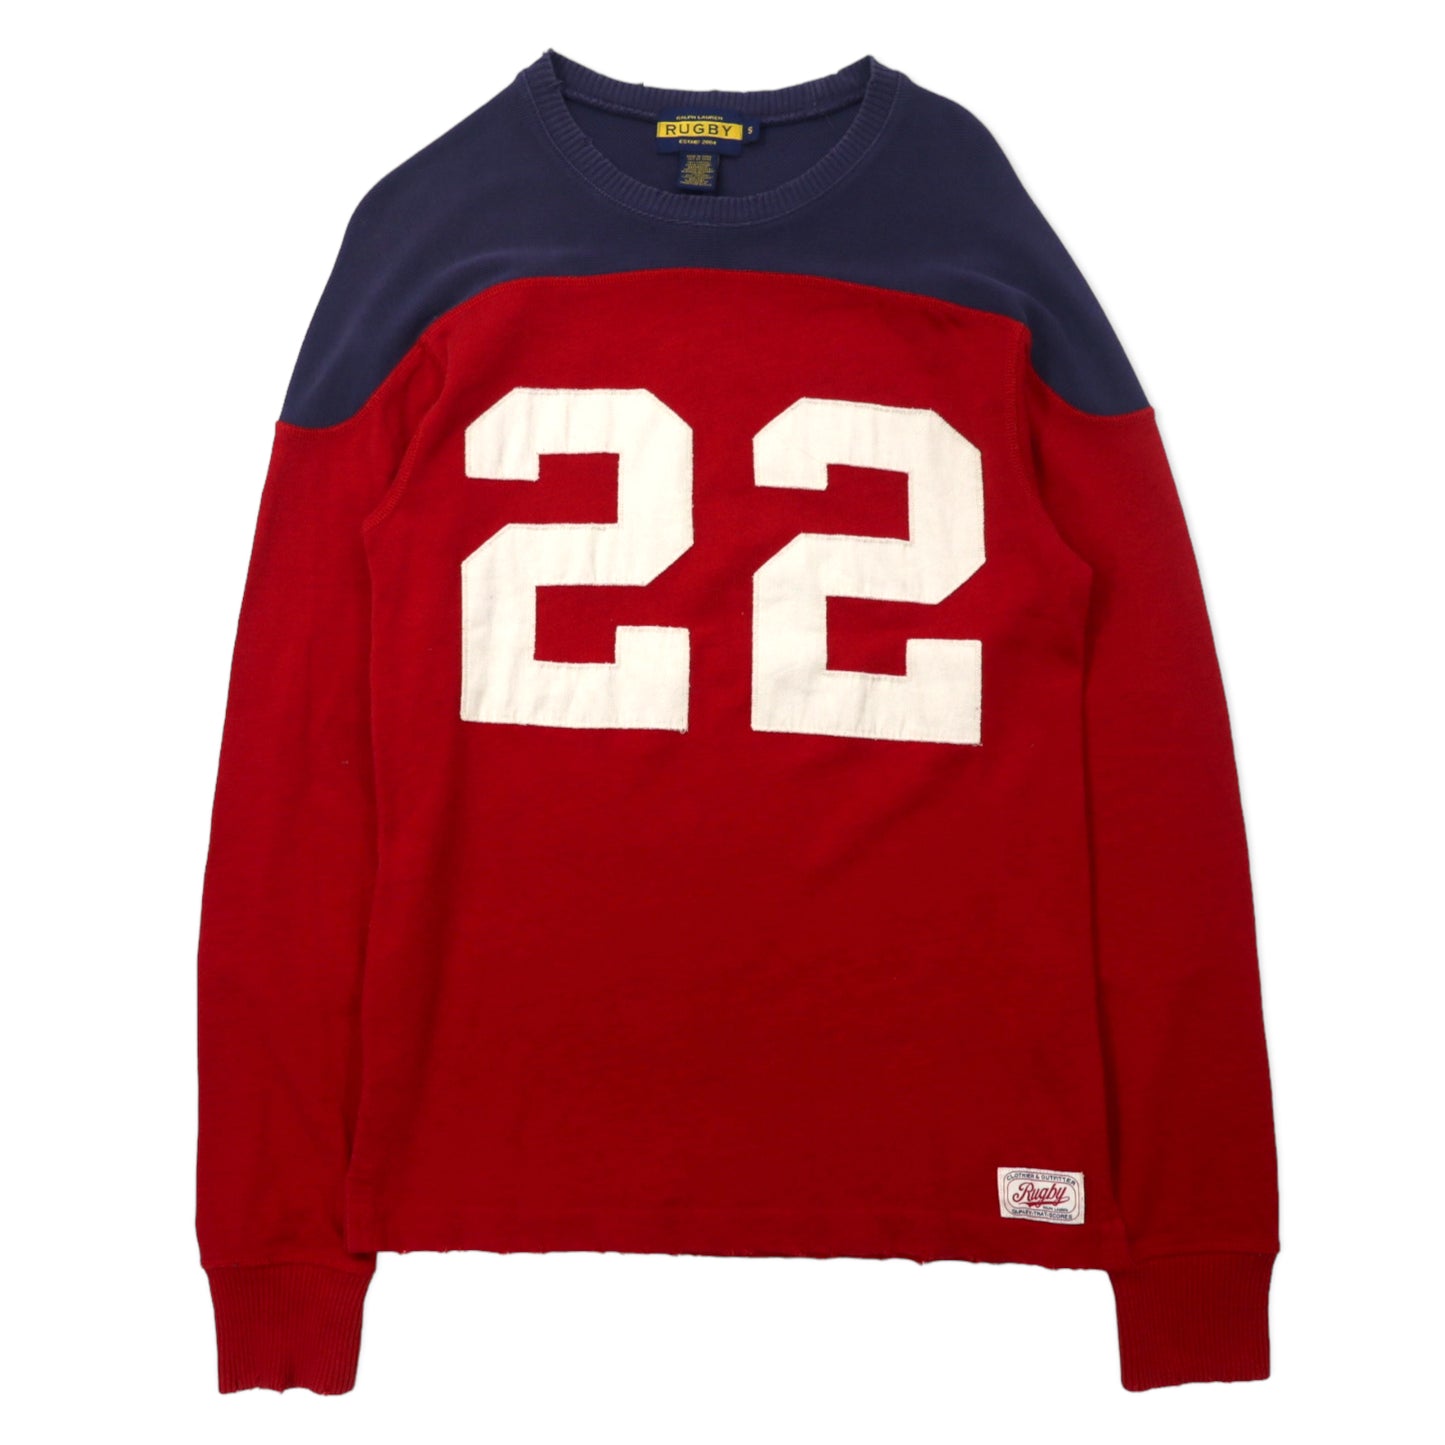 RUGBY RALPH LAUREN Football Shirt RUGBY SHIRT S Red Cotton Numbers